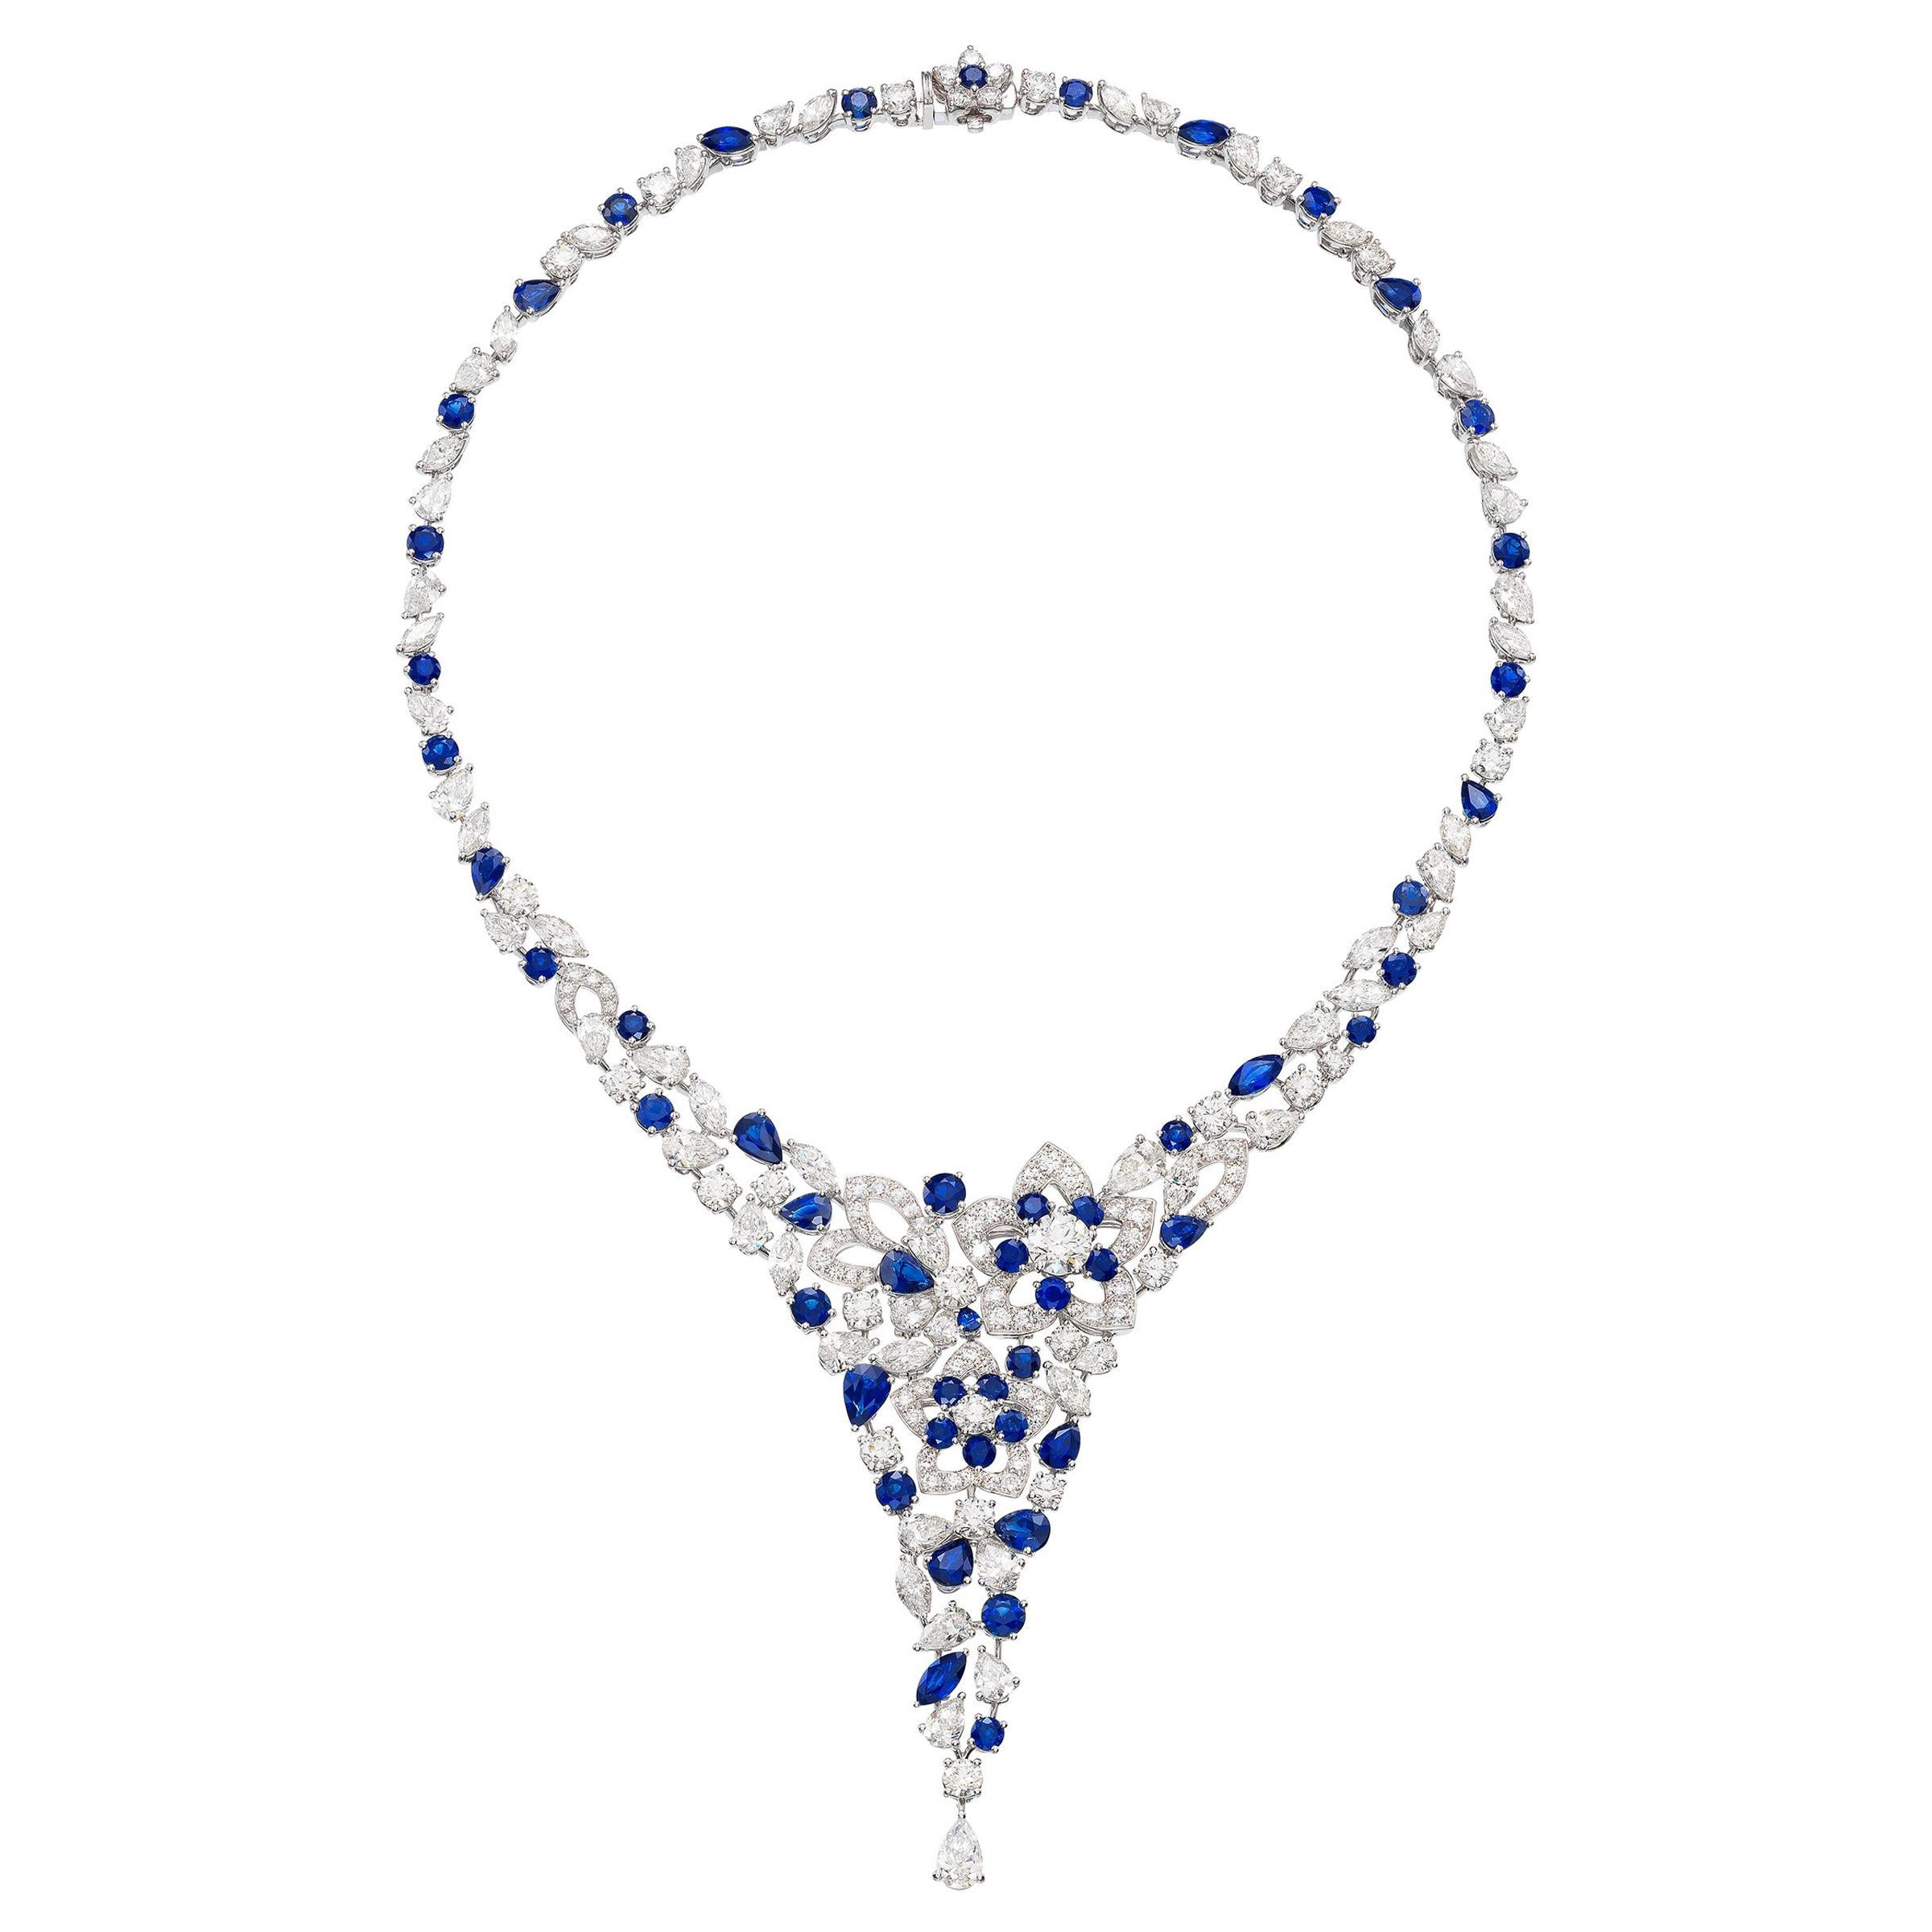 Graff Superb Sapphire Diamond Necklace in 18k Gold with GIA Certificates & Case